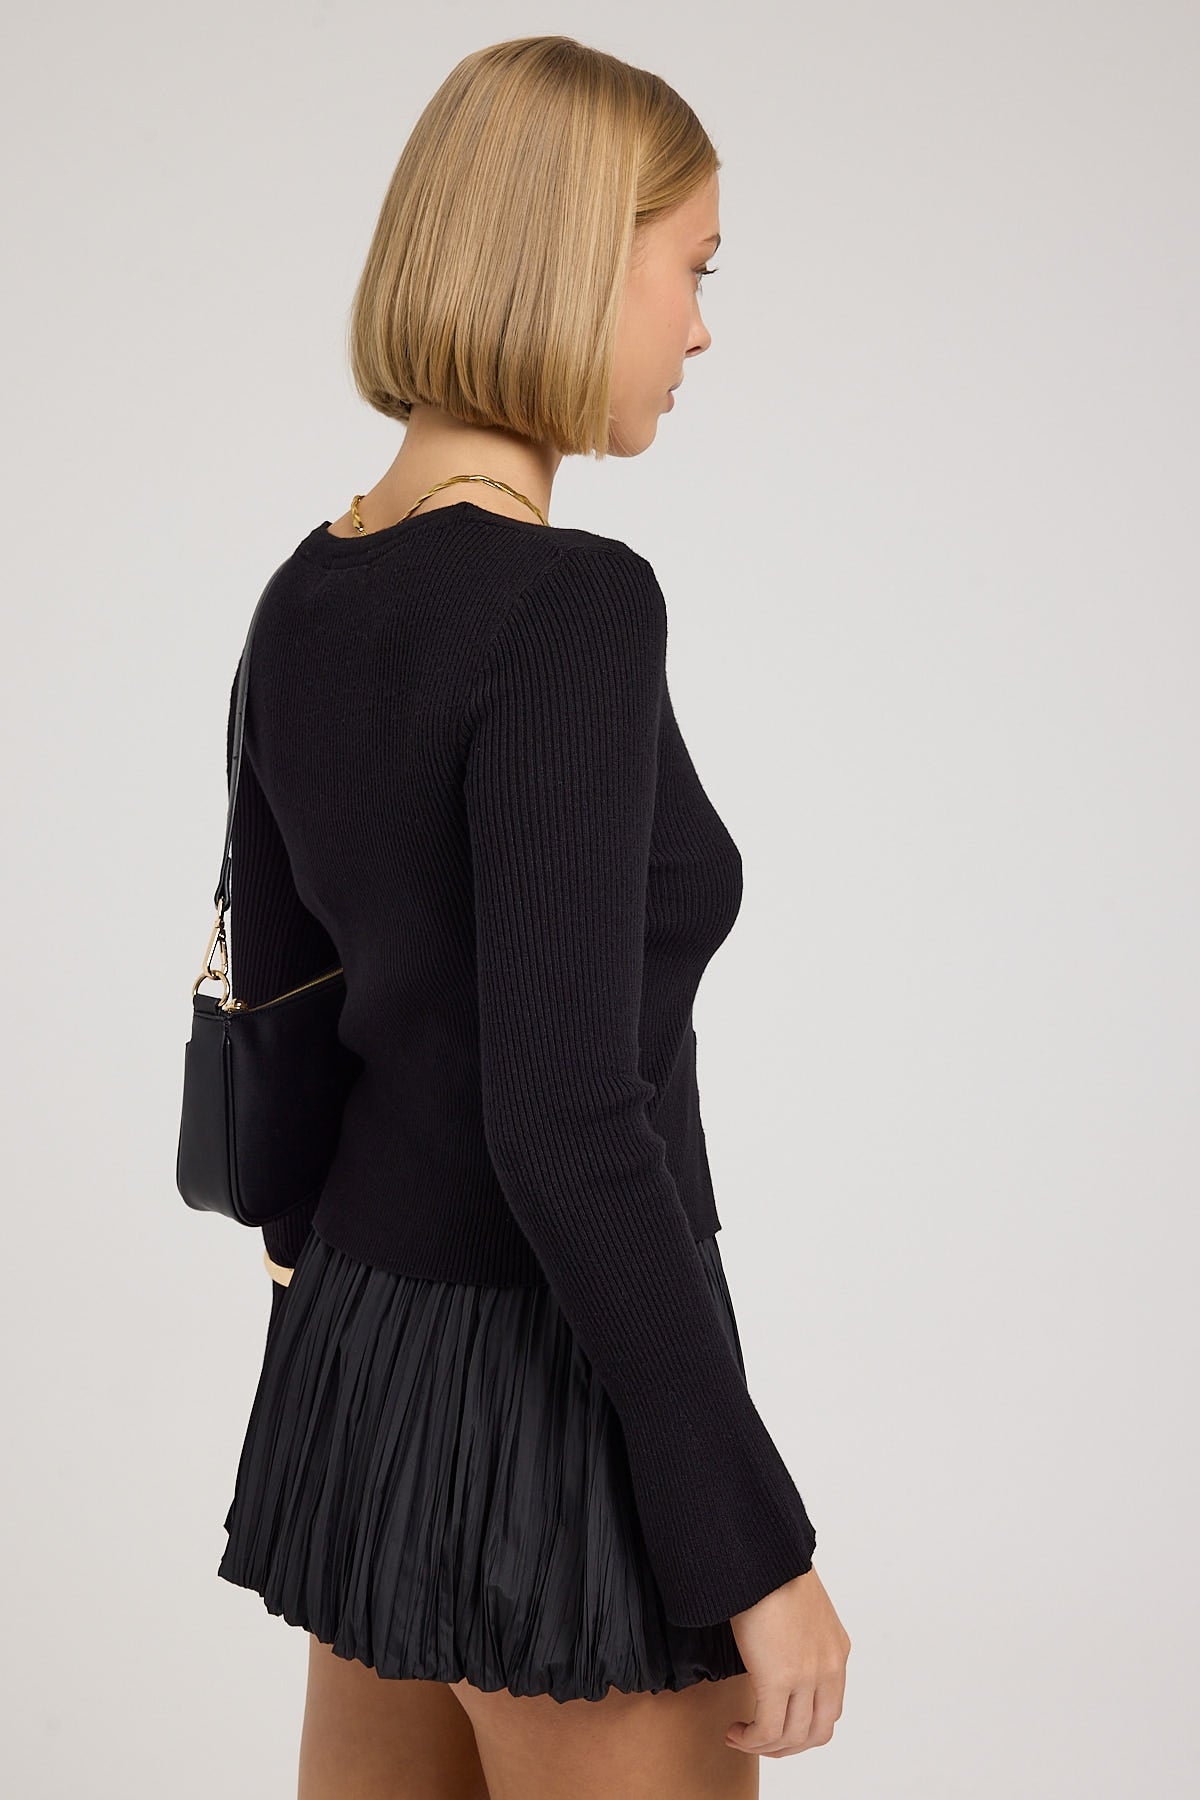 All About Eve Janis Knit Top Black